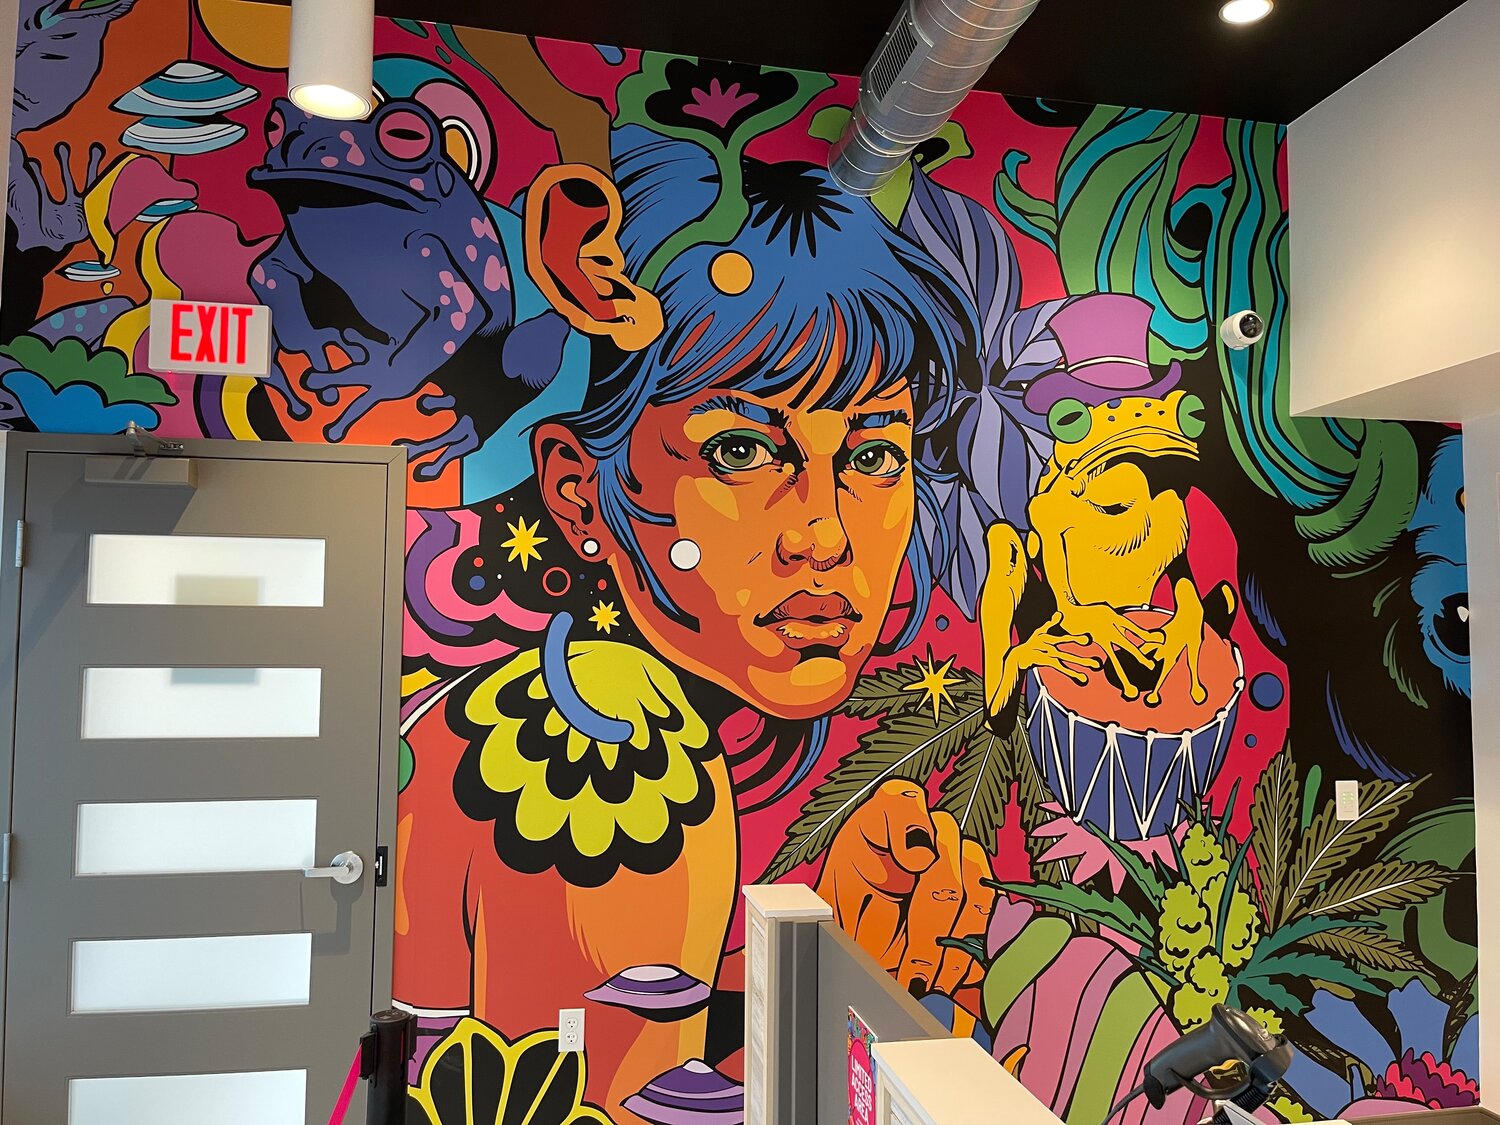 The inside of Sapura, a new dispensary on Dunckel Road, features a large, trippy mural by the Brazilian illustrator and muralist duo Bicicleta Sem Freio (“Bicycle Without Brake”).